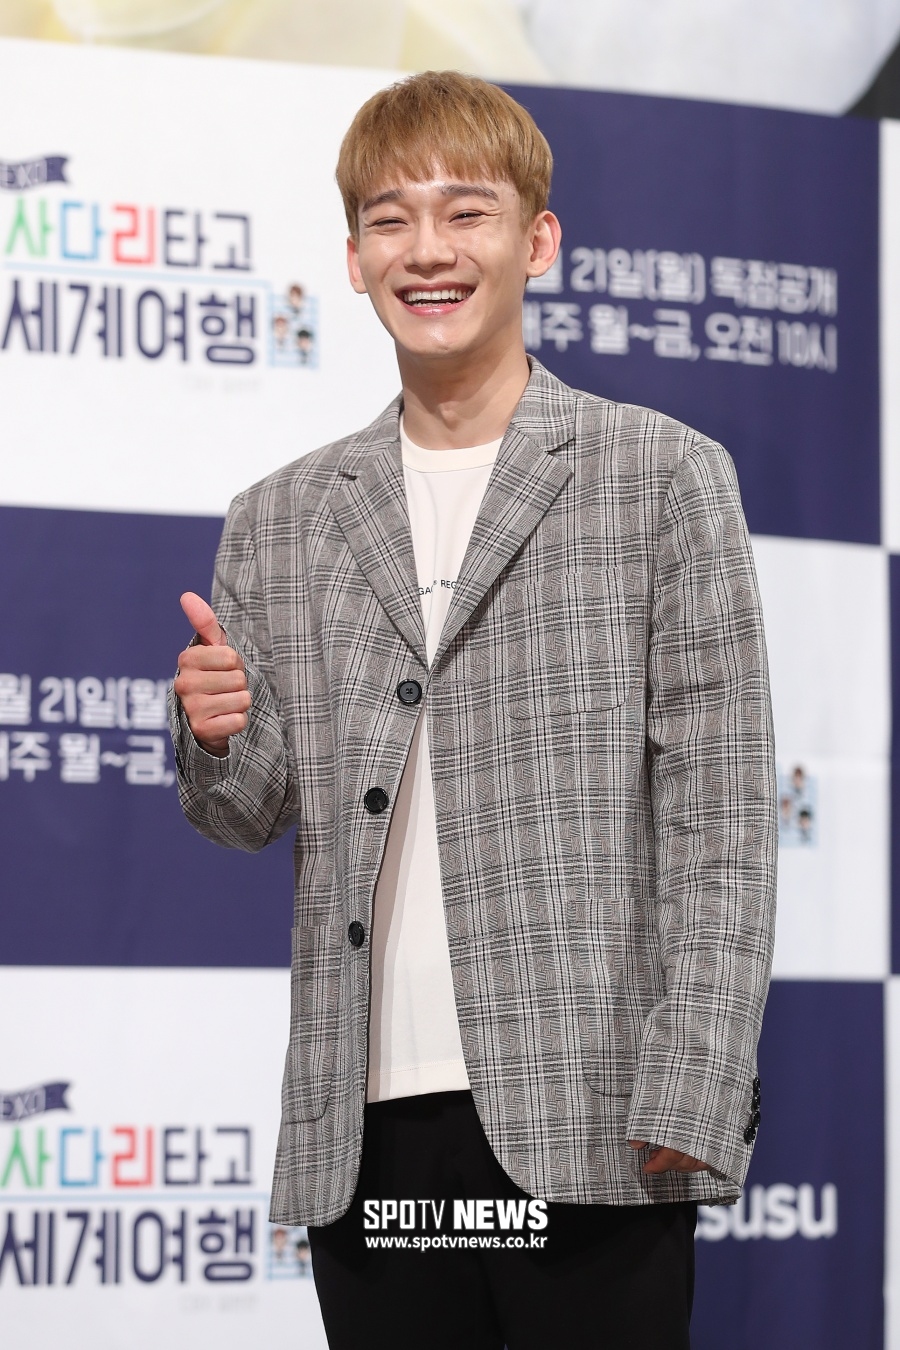 EXO fandom EXOel is crying and laughing, showing a complicated feeling because news of the marriage and pregnancy of EXO member Chen has been reported.EXO Chen posted a handwritten letter to Fan Community on the 13th to announce the news of marriage and pre-principal pregnancy.Chen said, Blessing came to me.Chen said, I was very embarrassed because I could not do the parts I planned with the company and the members, but I was more encouraged by this blessing. I was able to delay the time because I was worried about when and how to tell.I am deeply grateful to the members who have sincerely congratulated me on hearing this news and to the fans who are too grateful and have been so desperate for me. SM Entertainment, a subsidiary company, said, Chen met a precious relationship and became marriage.The bride is a non-entertainer, and the marriage ceremony is planned to be held reverently by only the families of both families. According to the familys will, everything related to marriage and marriage is conducted privately.In the meantime, the agency said, I would like you to look at Chens responsible figure beautifully. As an EXO member, my activities will not change in the future.It is a line with Chens determination to reciprocate the love you sent.The sudden response to Chens marriage and the news of the second generation is surprising to fans as well as the public.He is also not the best Idol EXO news of the marriage and the second generation news is unusual for the active top Idol move.Chens name has dominated real-time search terms on various portal sites, and Chen marriage has become a hot topic in online community and SNS.Fans are in a rather mixed mood, with the public sending messages of congratulations and support to Chens letter, which is genuine and candid in love.Some of them support his love, saying that 29-year-old Chen understands enough as he is in the age of marriage as well as devotion.In addition, Chens Soon Abo, which is responsible for the entertainment industry, which has been messy due to various privacy controversies, is being talked about as another incoming point.However, some fans are devastated that the love of Top Idol, which sells fantasy, is difficult to see as a category of youth.His homemasters close the fan pages in a row, while in Fan Community, they sublimate their grief into humor and comfort each other.In fact, in the Idol industry, public devotion has been regarded as a variable that has a decisive impact on success or failure, so it is evaluated that this response is natural.Now, the agitating fanfare is the subject of the party, and many people are paying attention to his future activities to see if Chen can continue his slope in his personal life and work.